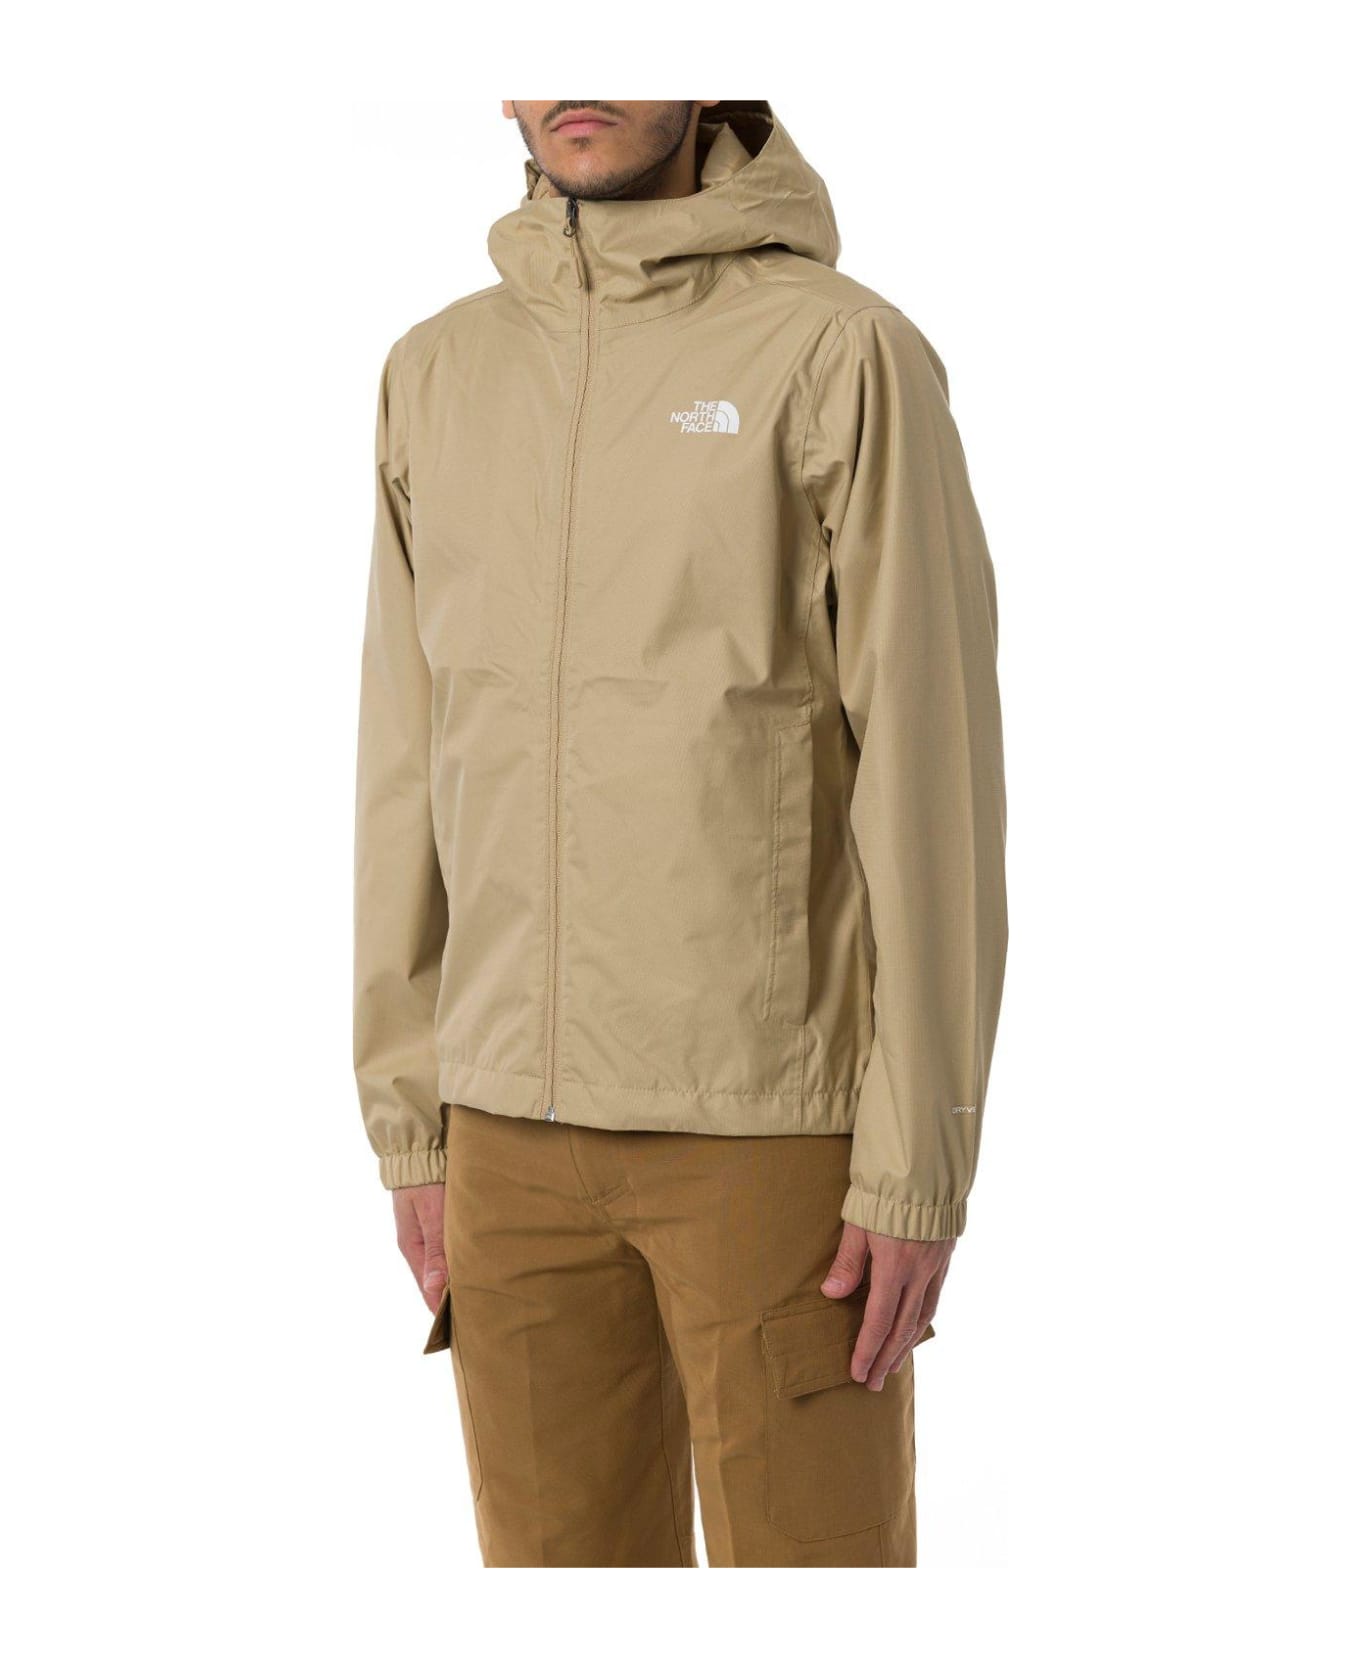 The North Face Quest Logo Printed Hooded Jacket ジャケット